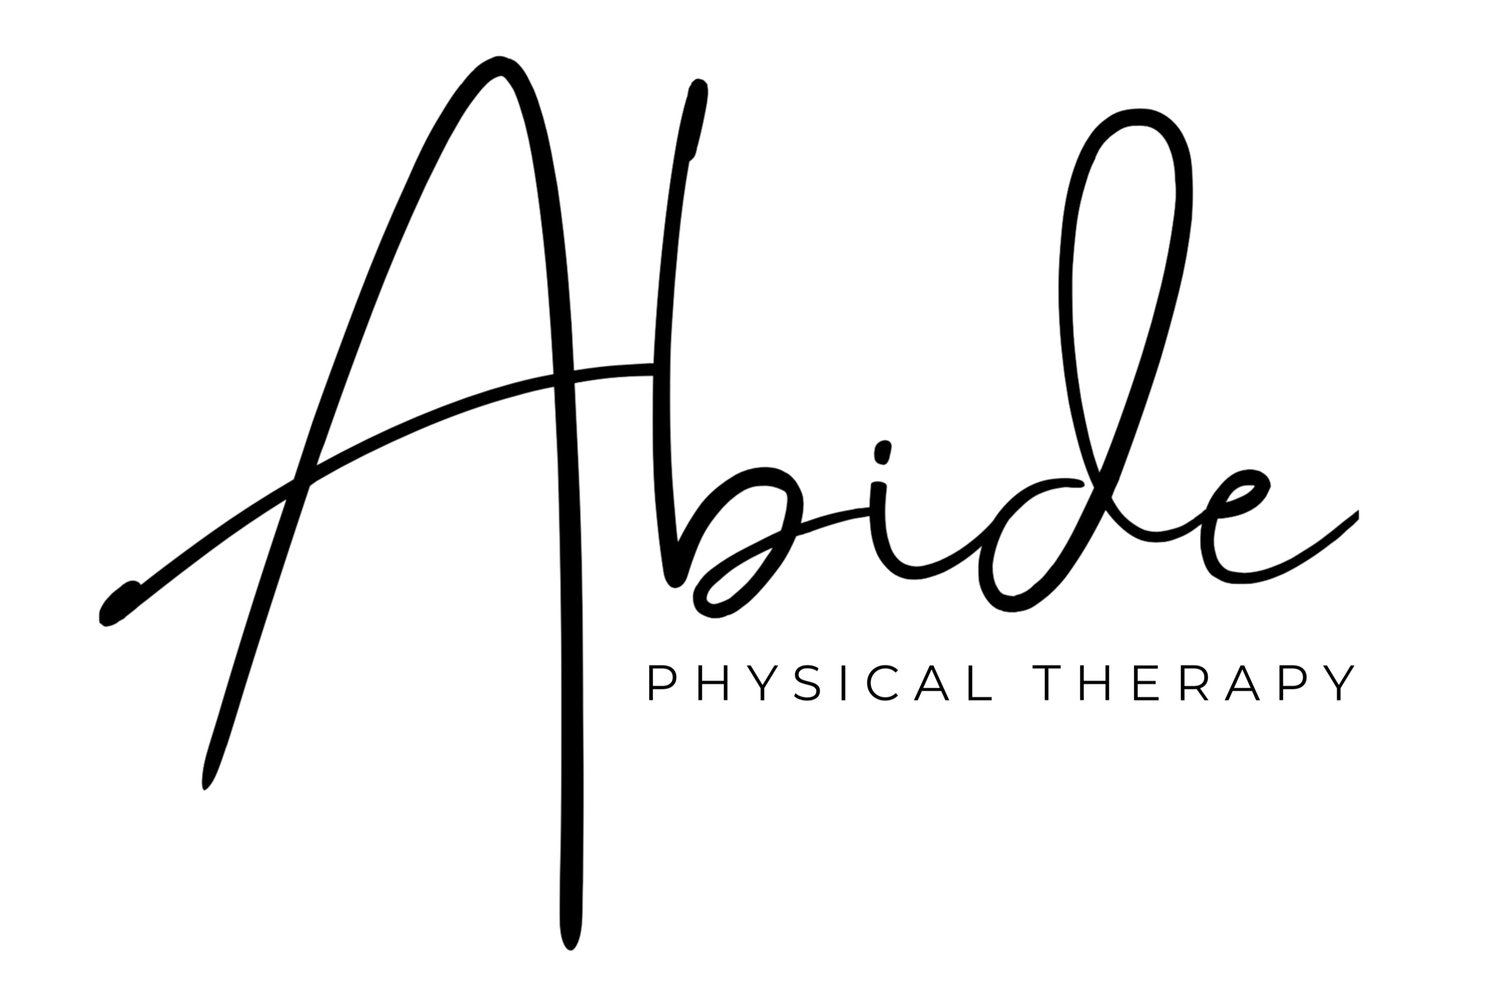 Abide Physical Therapy